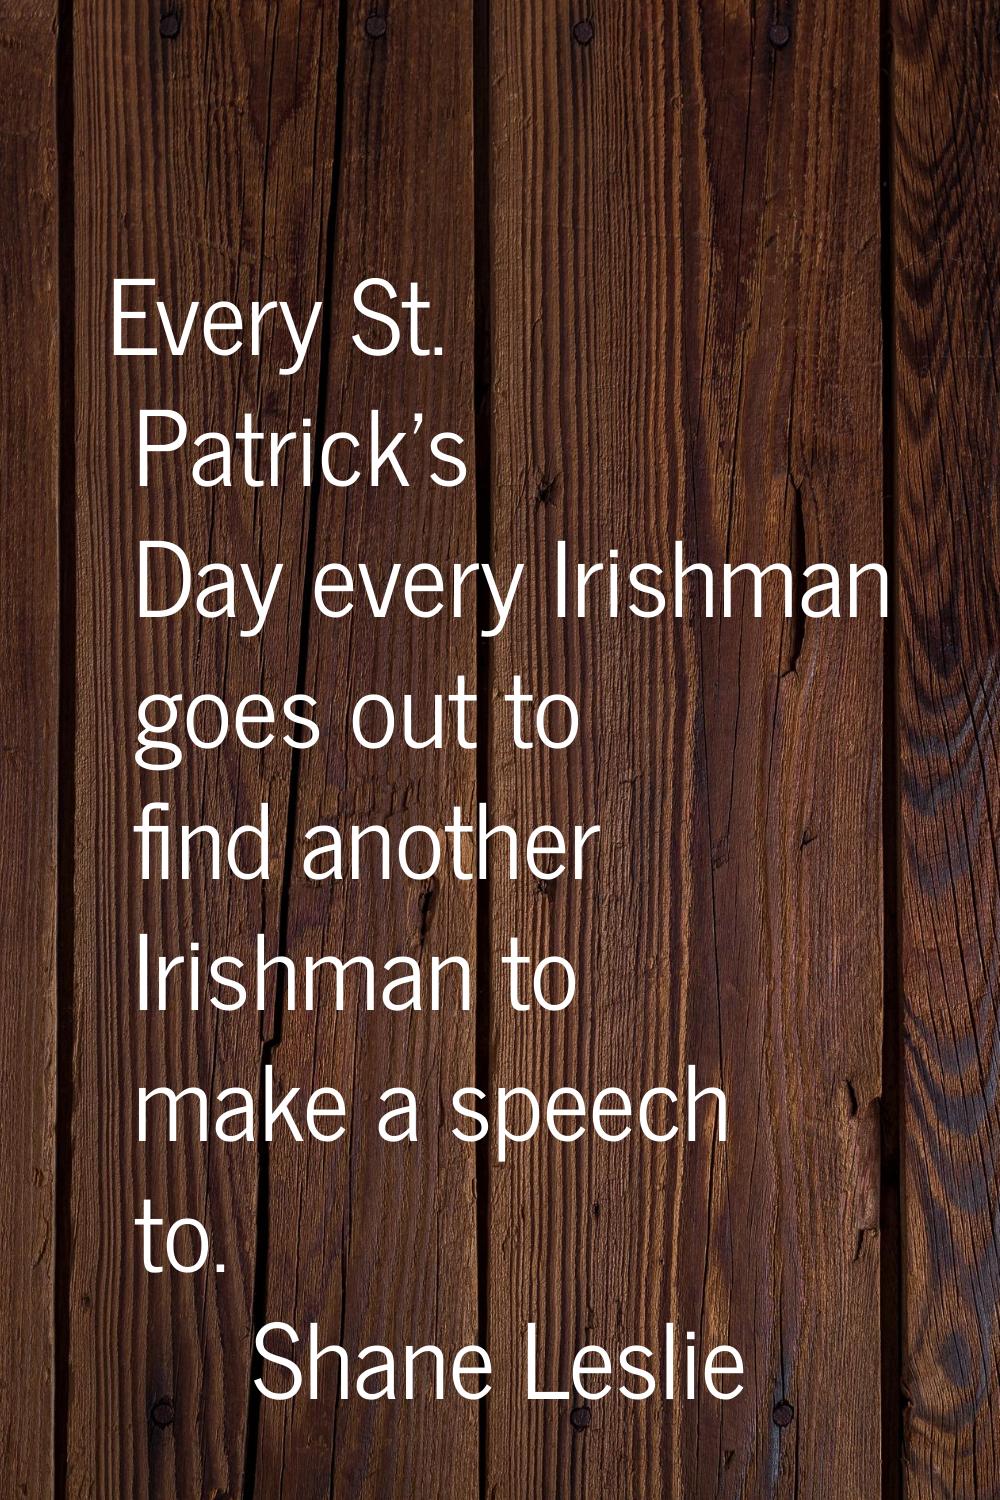 Every St. Patrick's Day every Irishman goes out to find another Irishman to make a speech to.